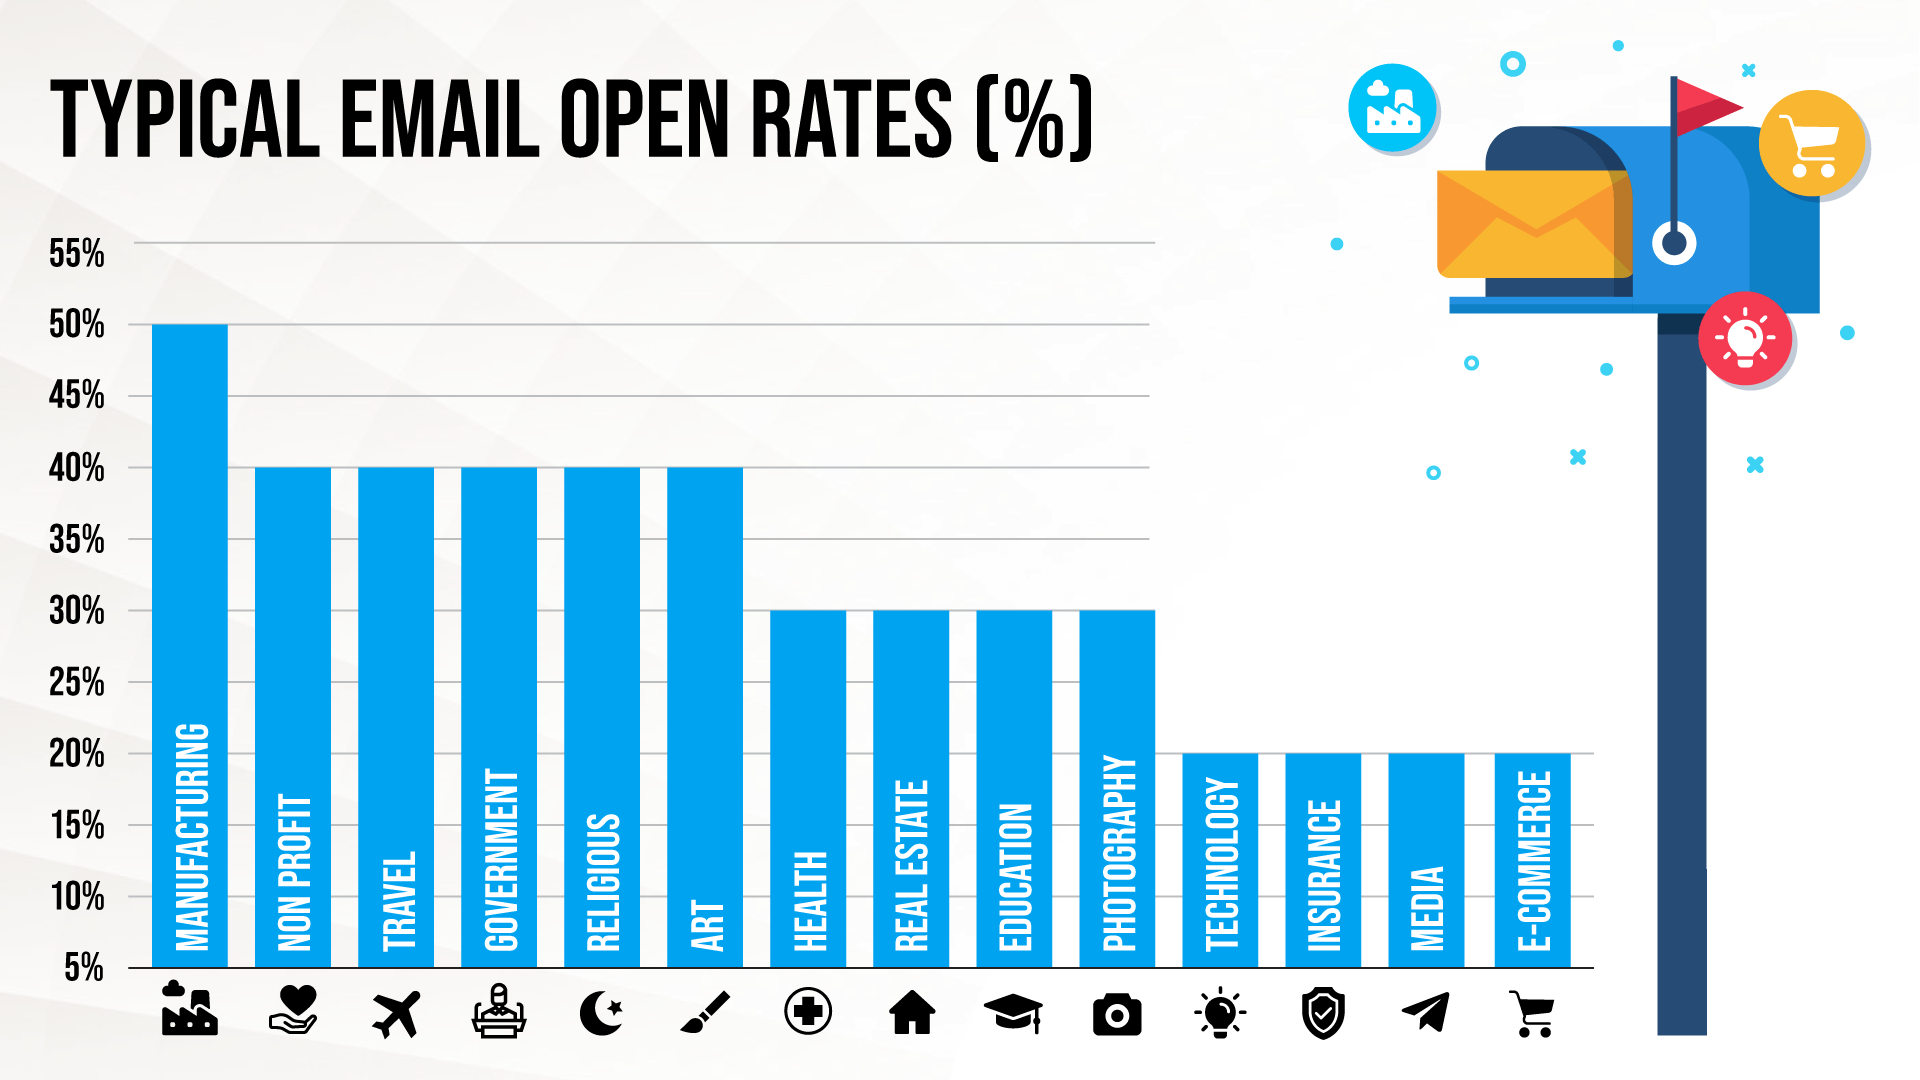 Email open rates